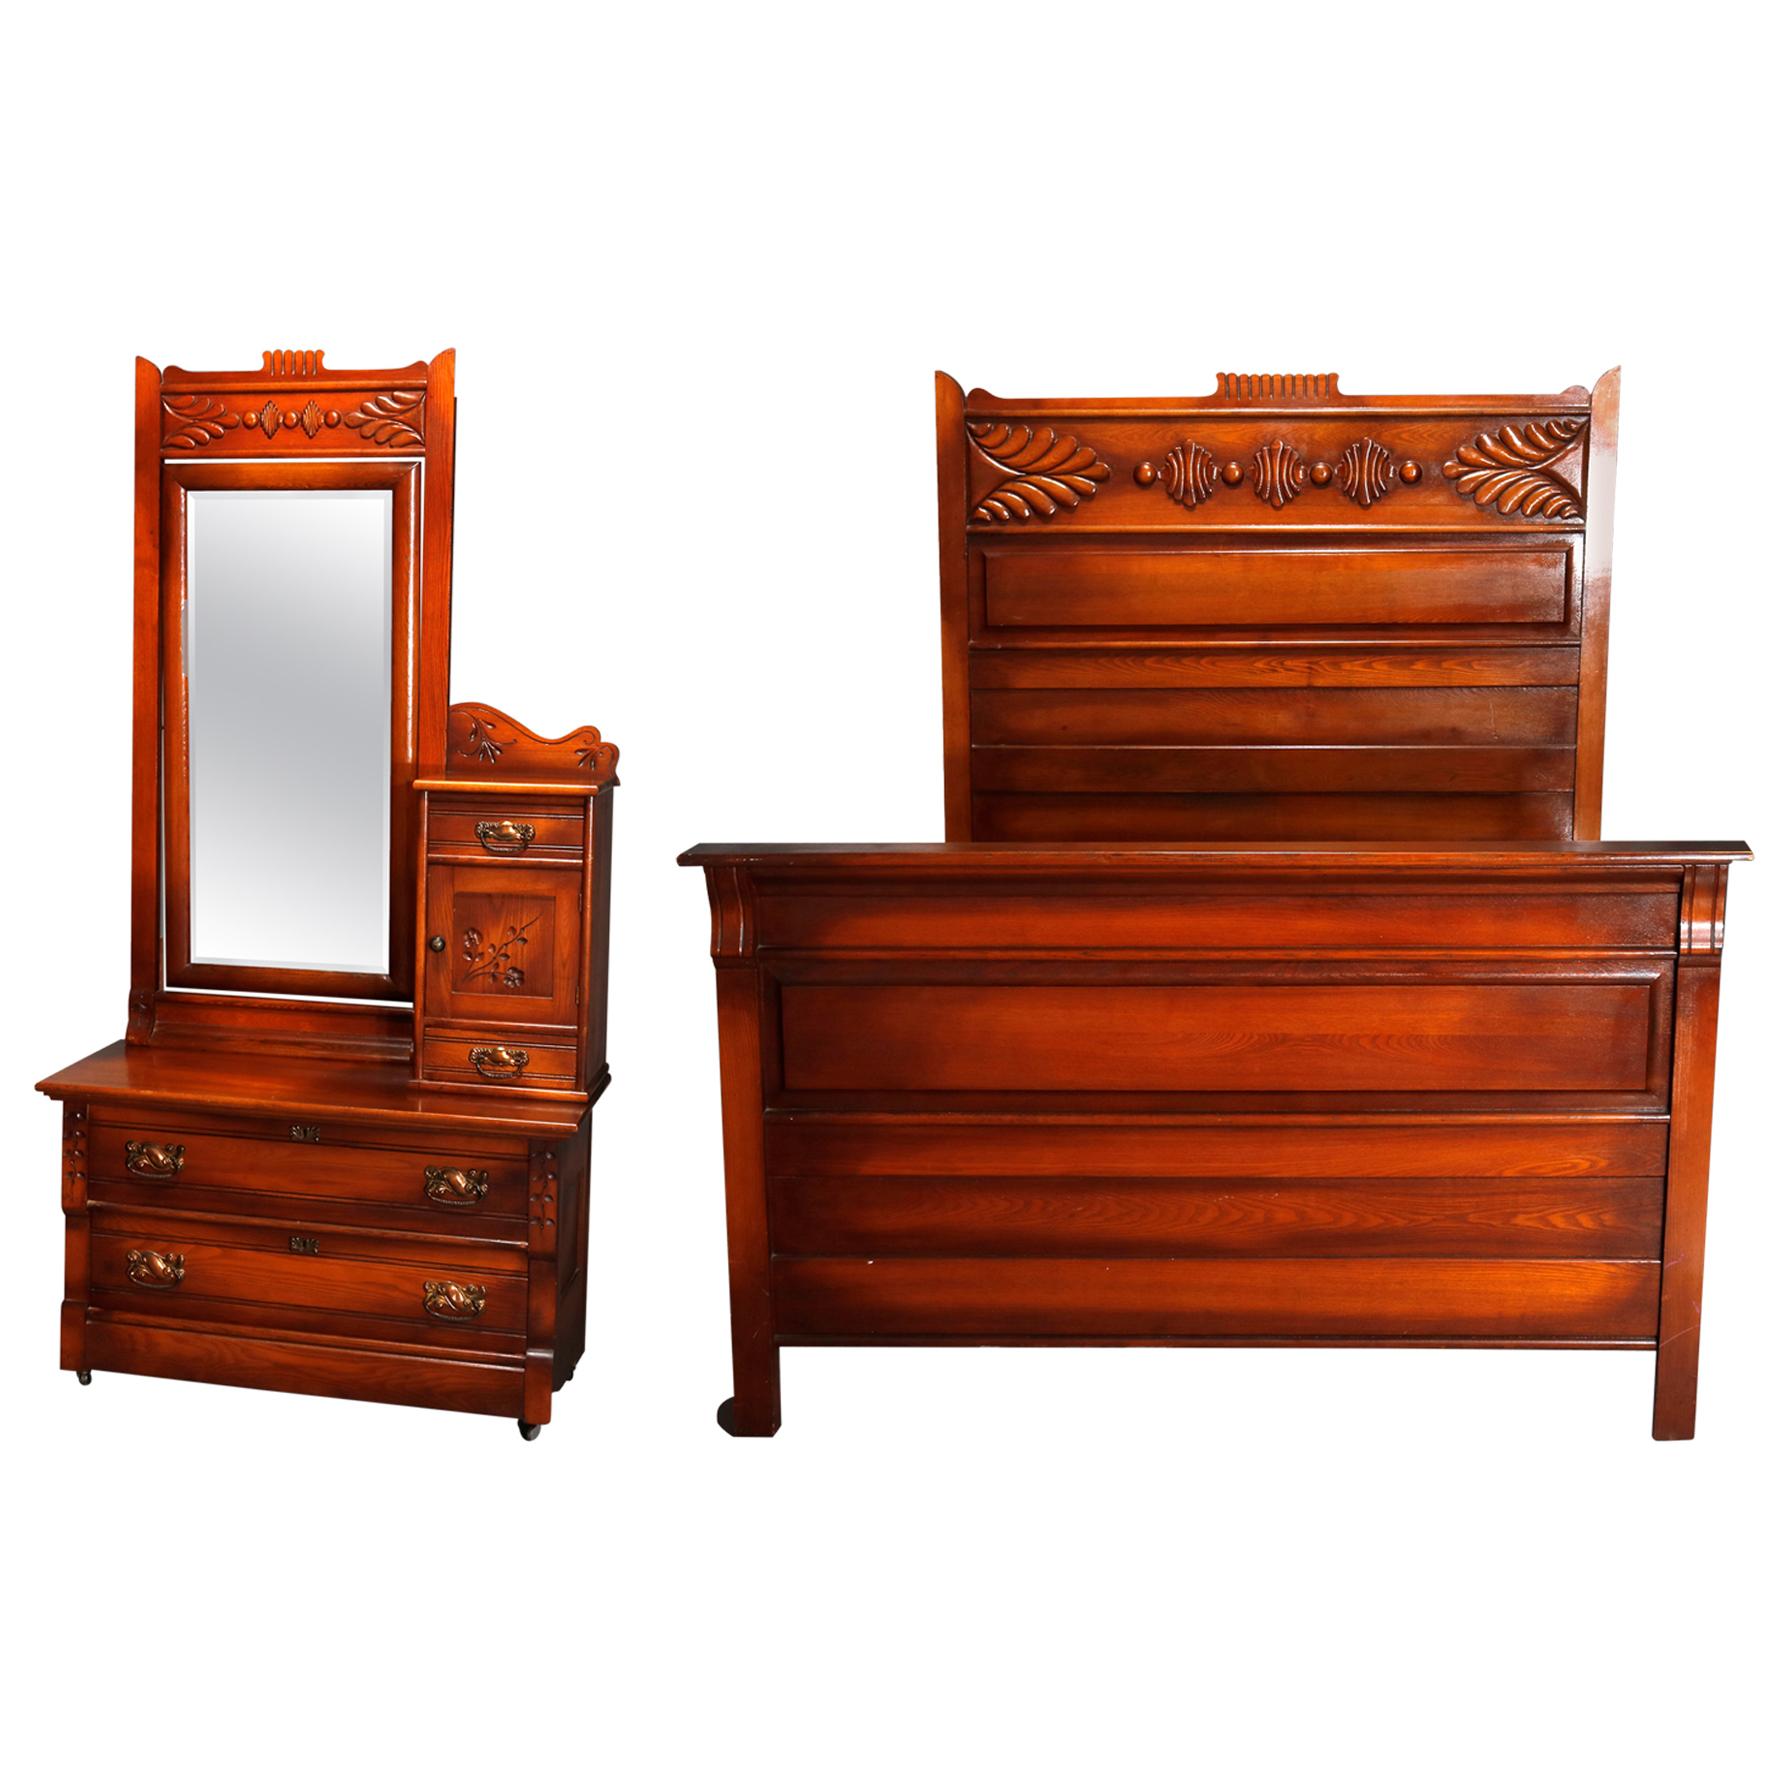 An antique Victorian Eastlake bedroom suite offers oak construction with carved stylized foliate elements and includes full size tall back bed, dressing bureau with long mirror and bonnet box, and wash stand, circa 1890.

Measures: Bed frame- 78